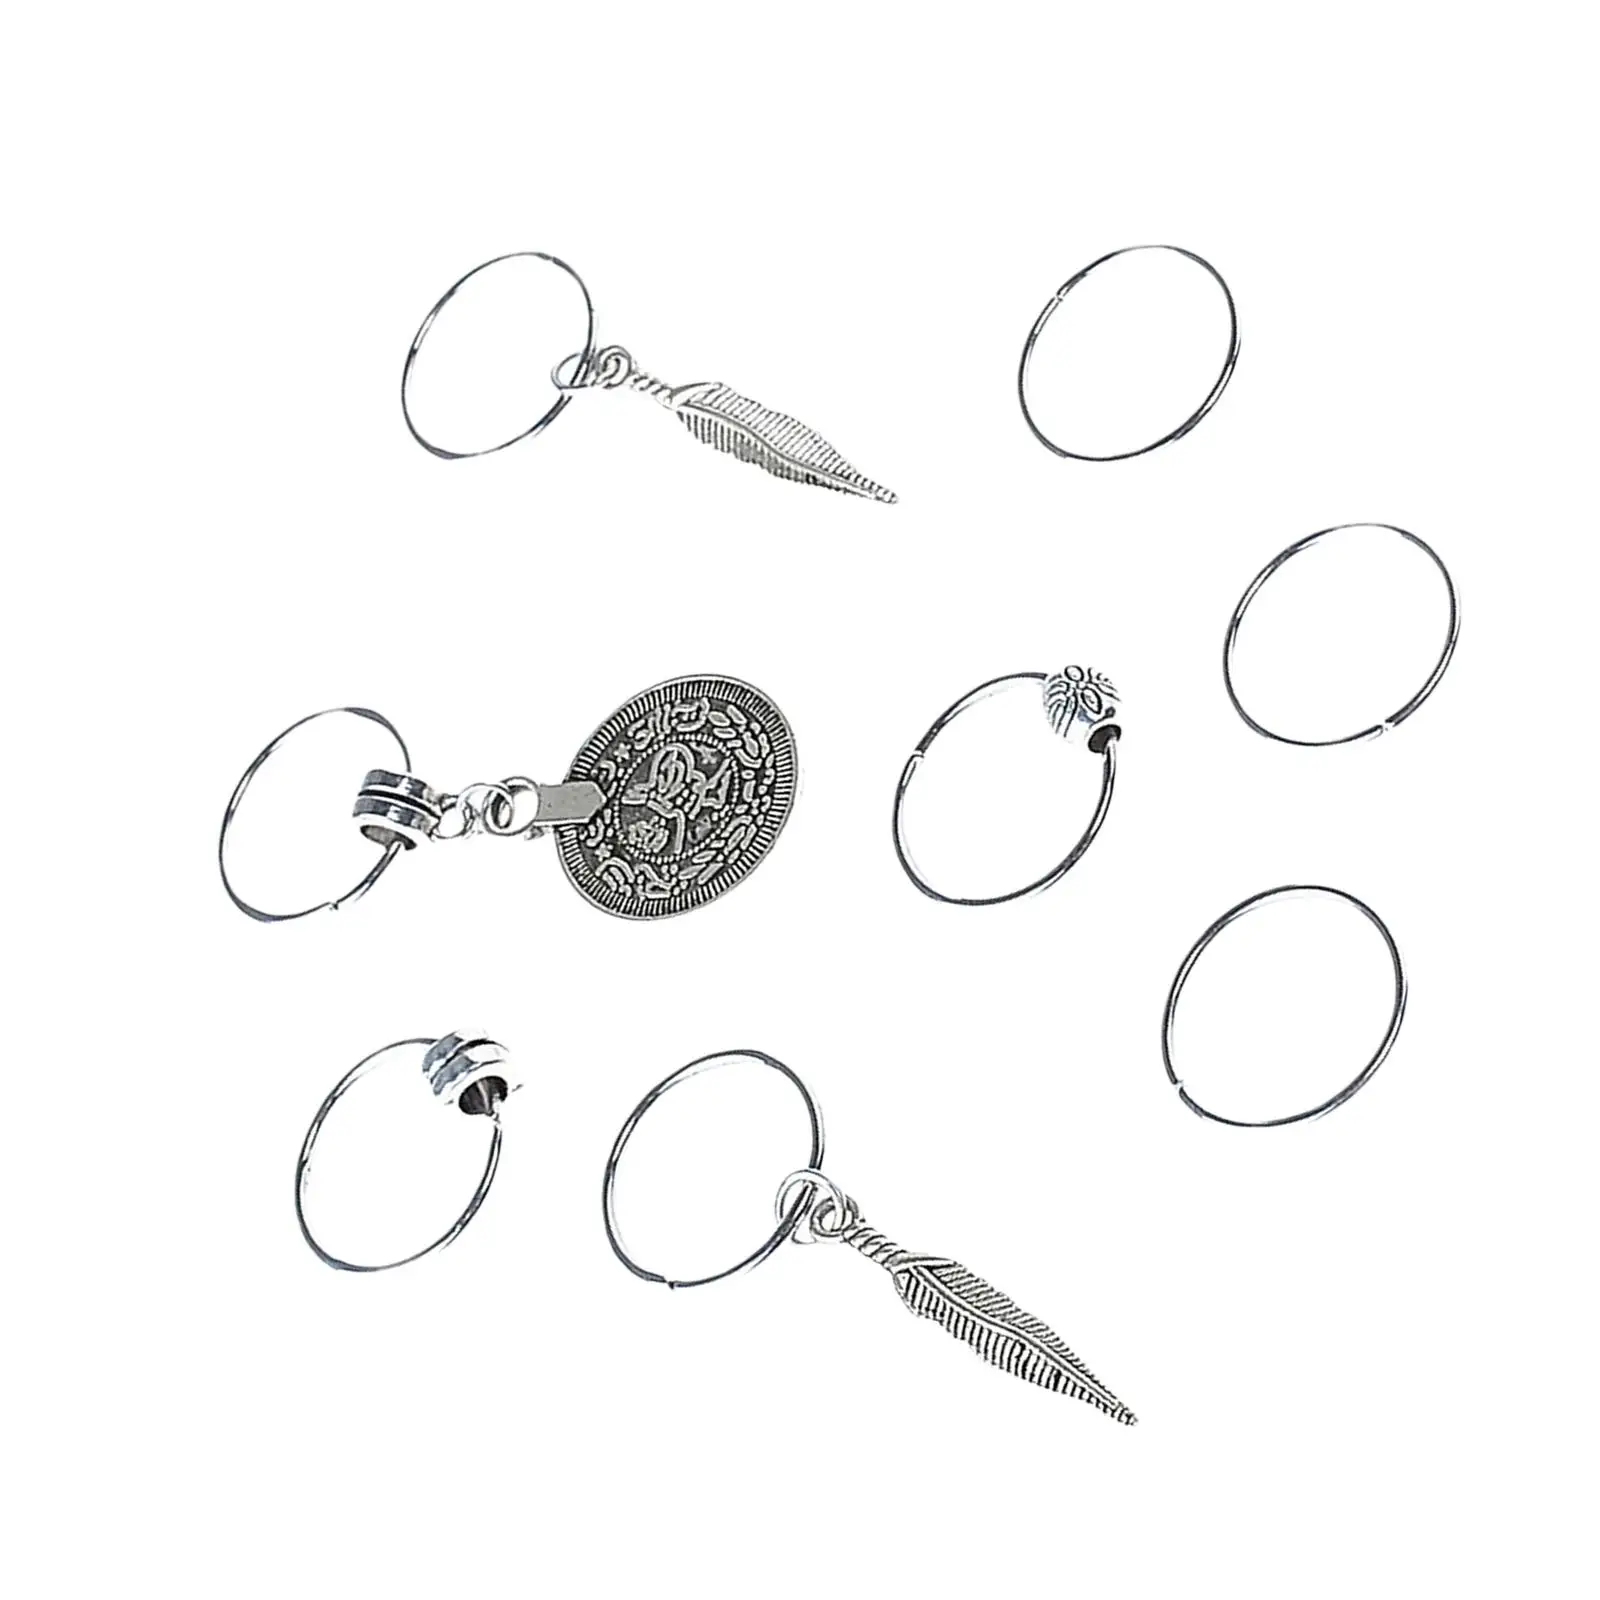 8 Pieces Hair Braid Dreadlock Clips Cuffs Rings jewelry Women Braids Accessories 8 Styles Charms Multiple Styles Pendant